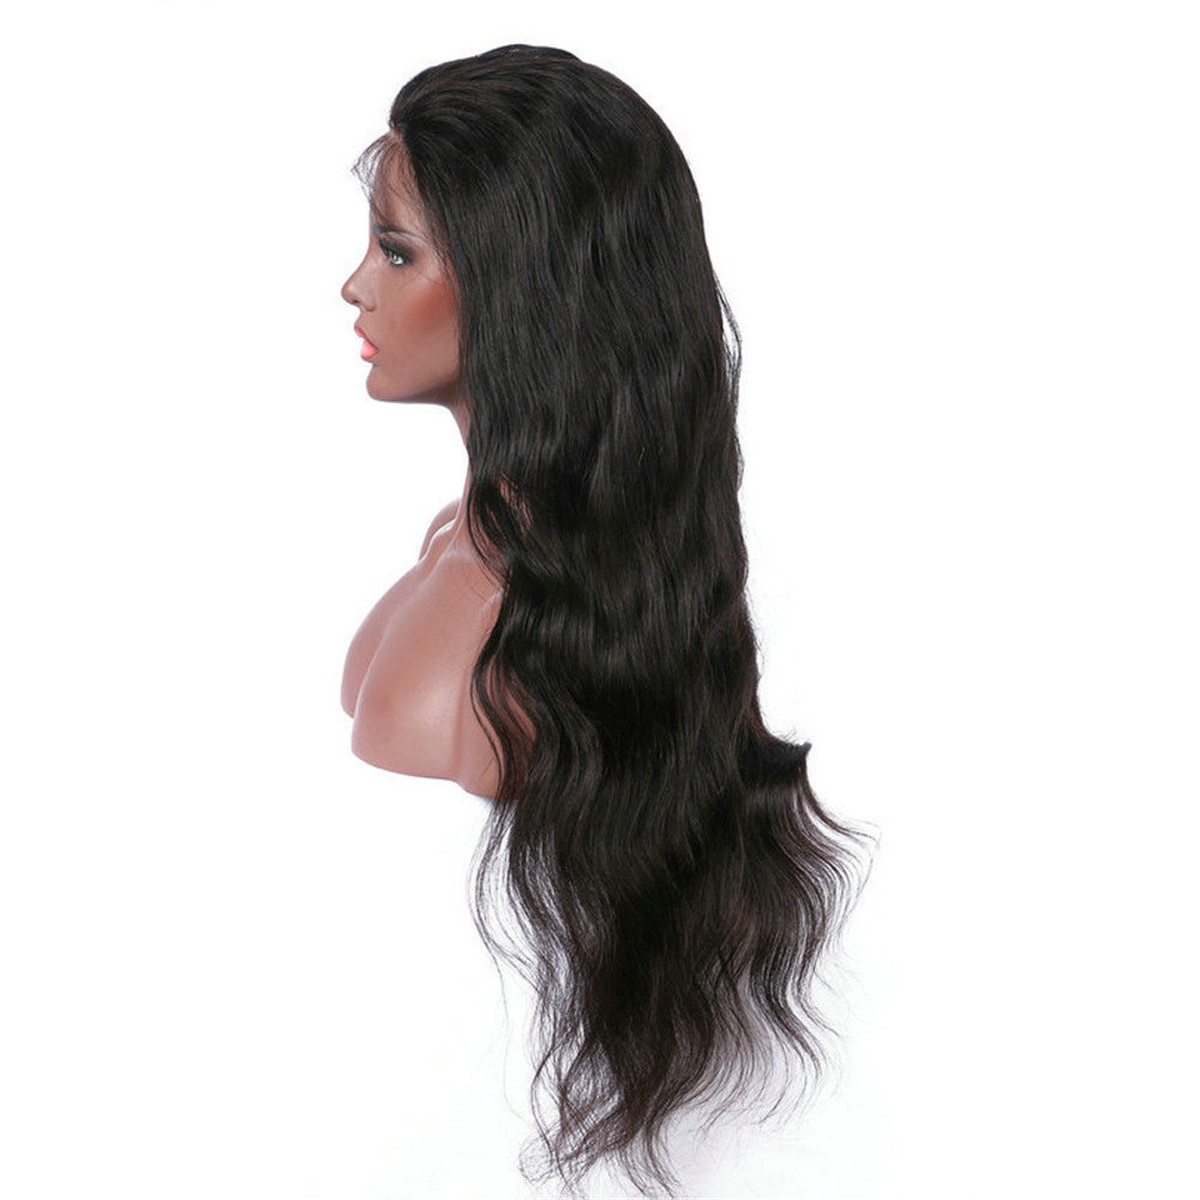 26-inch-Black-Women-Curly-Wig-Glueless-Full-Lace-Wigs-Remy-Lace-Front-Hair-1285227